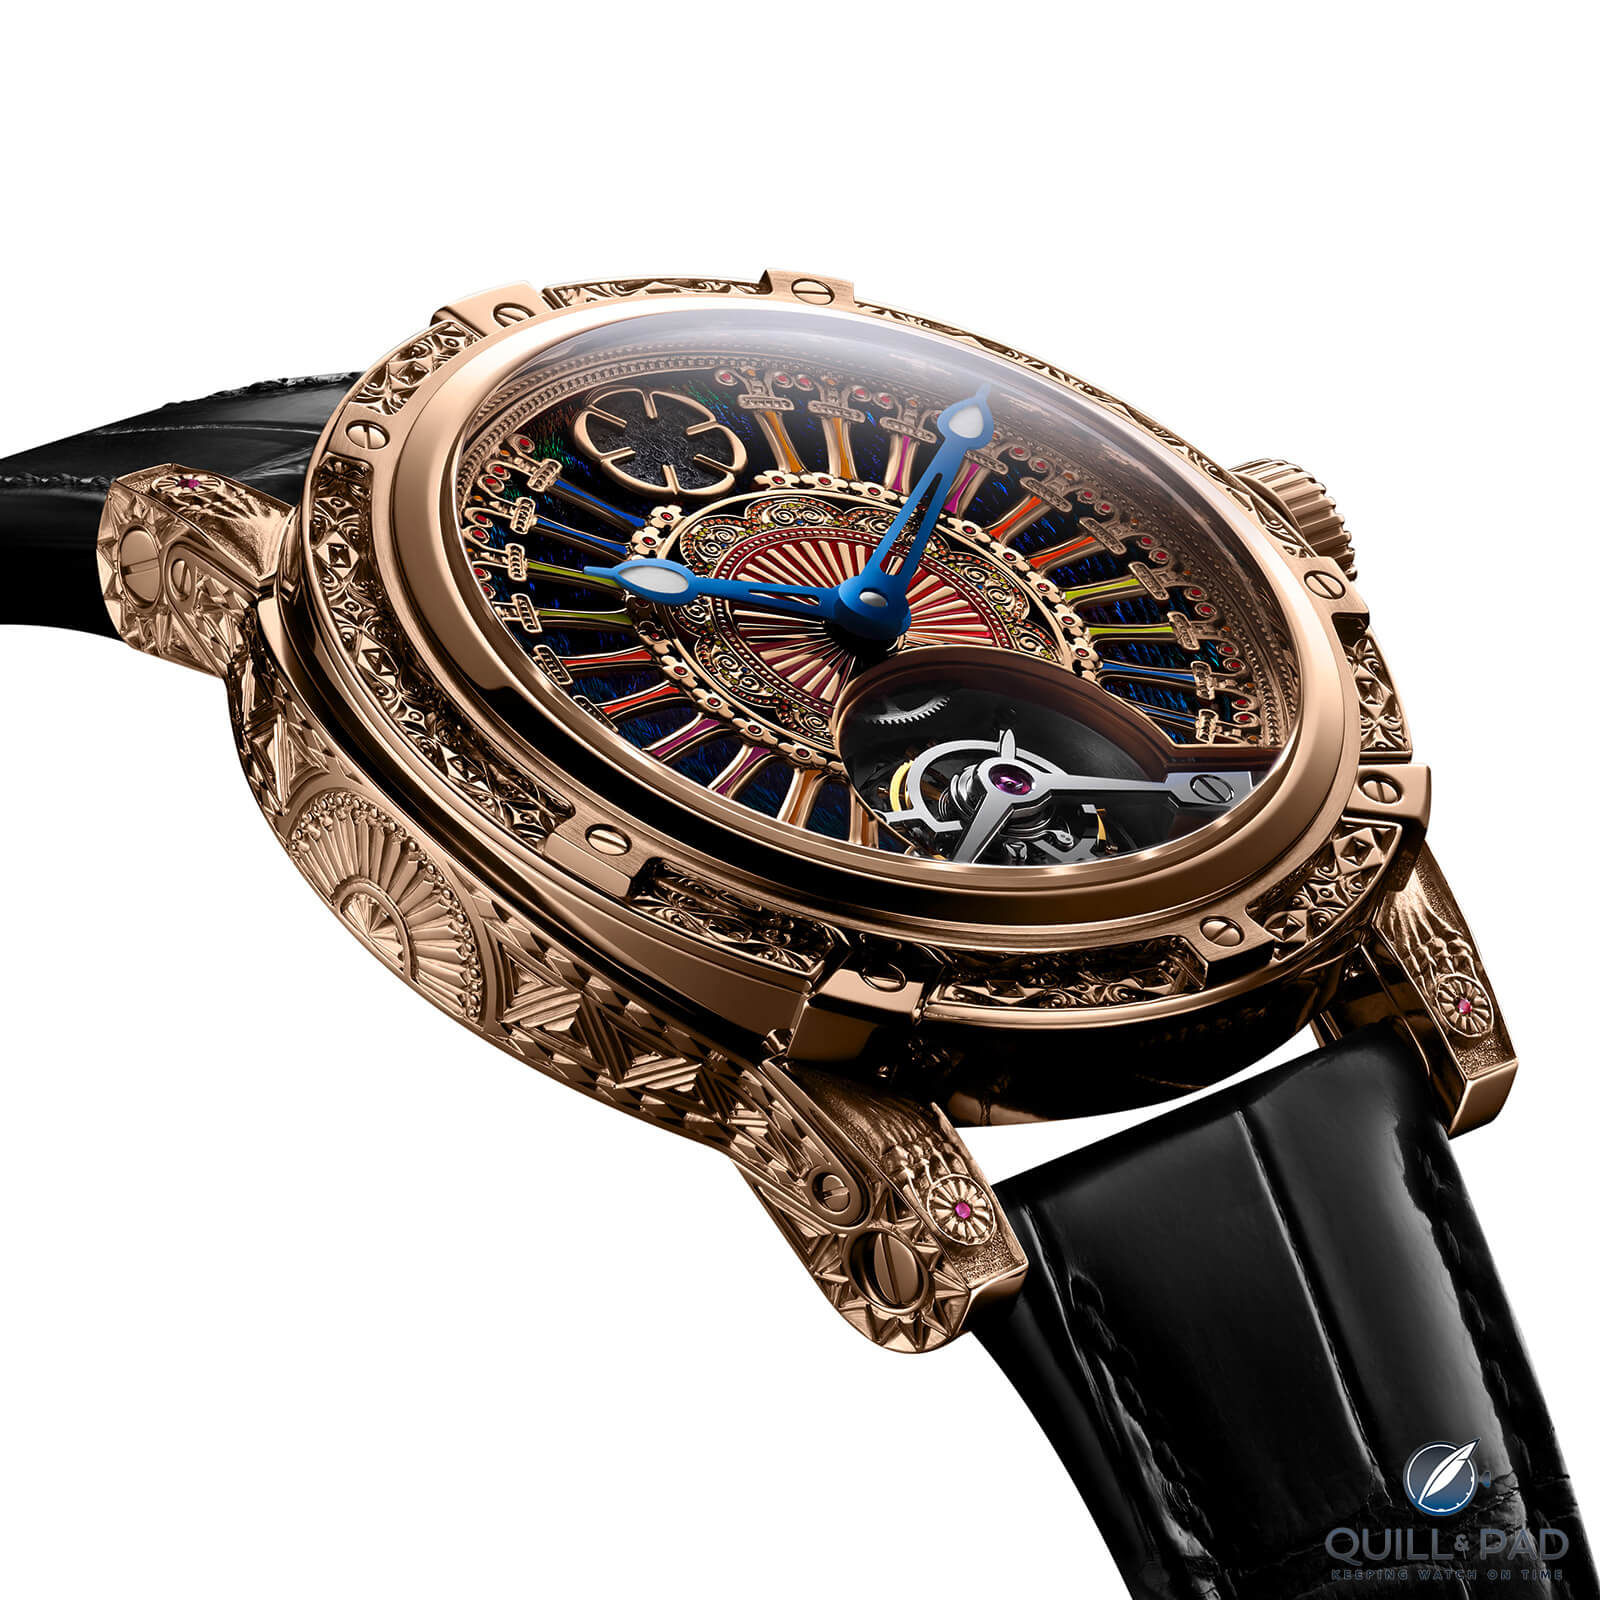 Louis Moinet ONLY INDIA